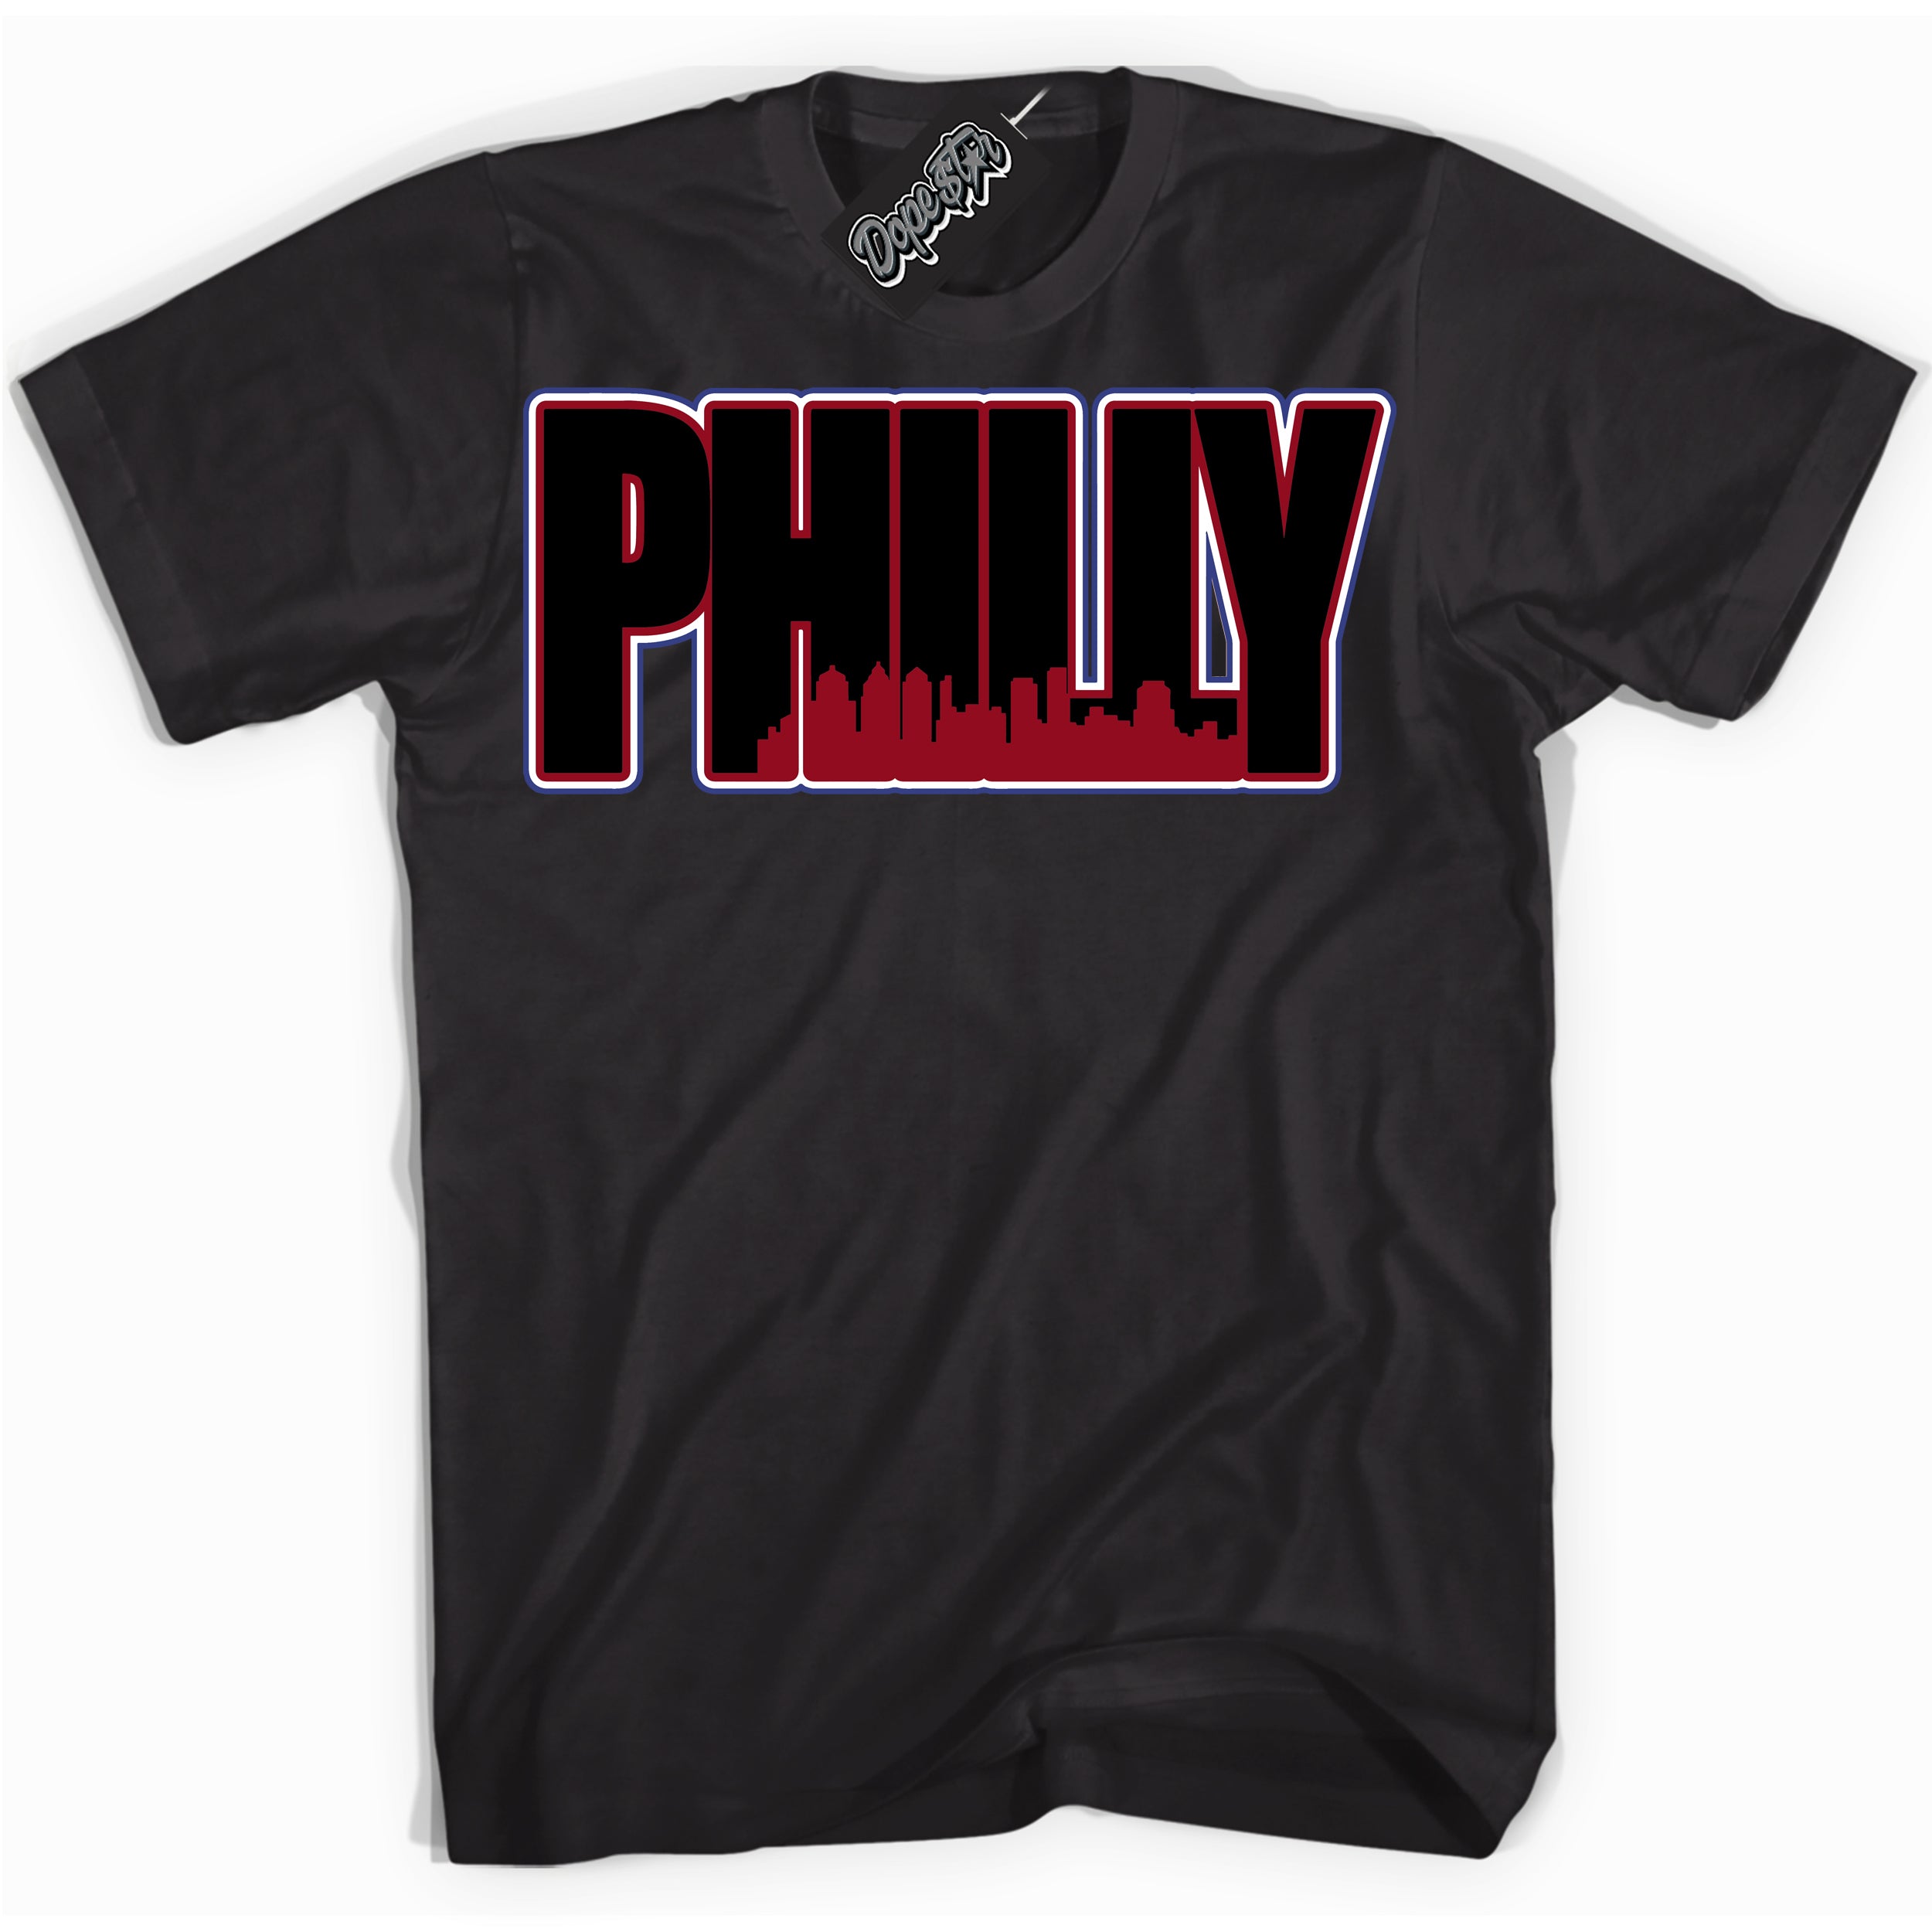 Cool Black Shirt with “ Philly ” design that perfectly matches Playoffs 8s Sneakers.